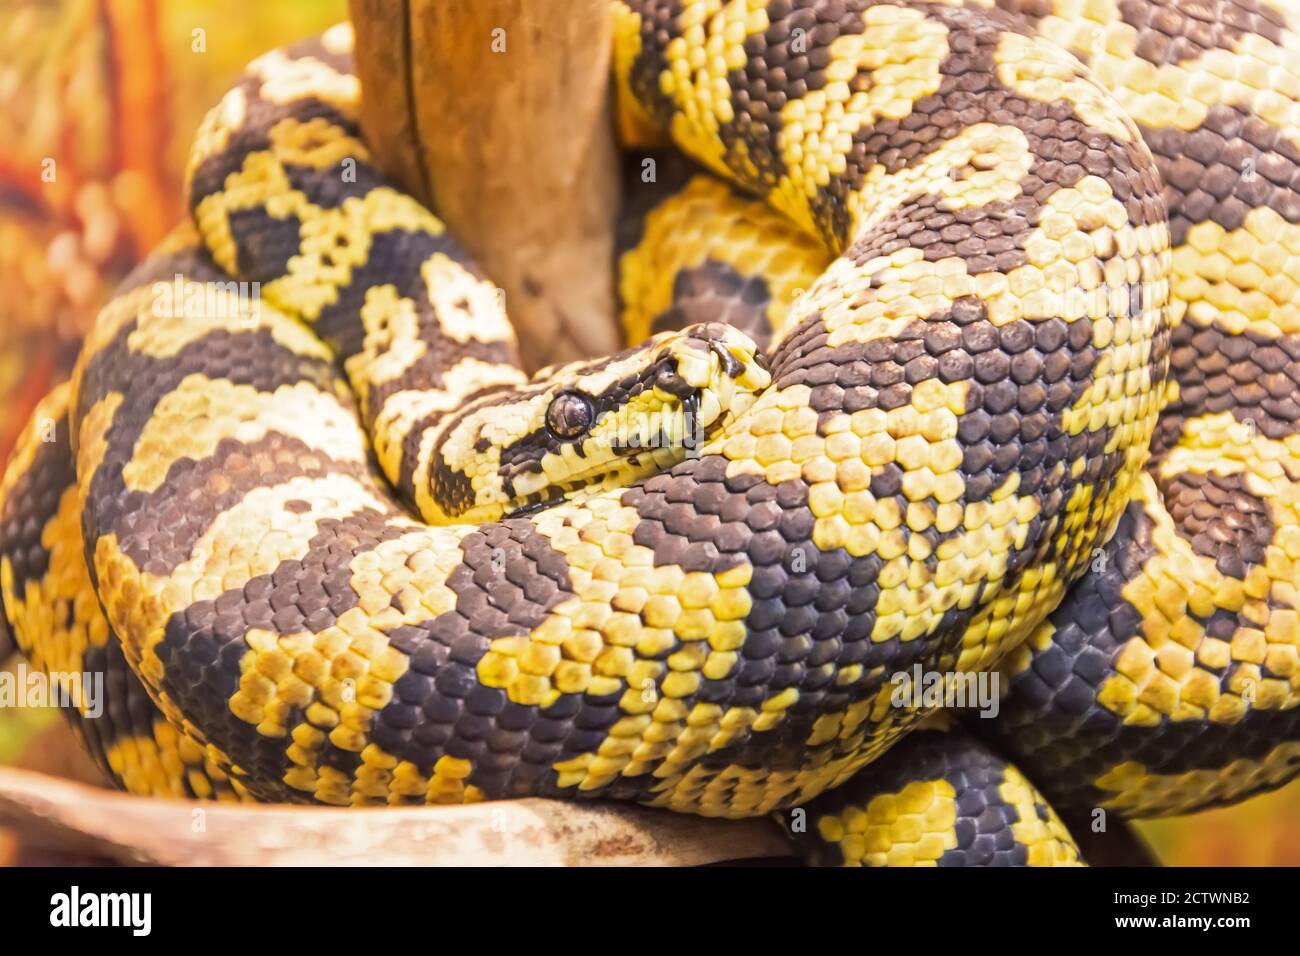 Carpet python with yellow-black colors on the sand of the desert zones Stock Photo